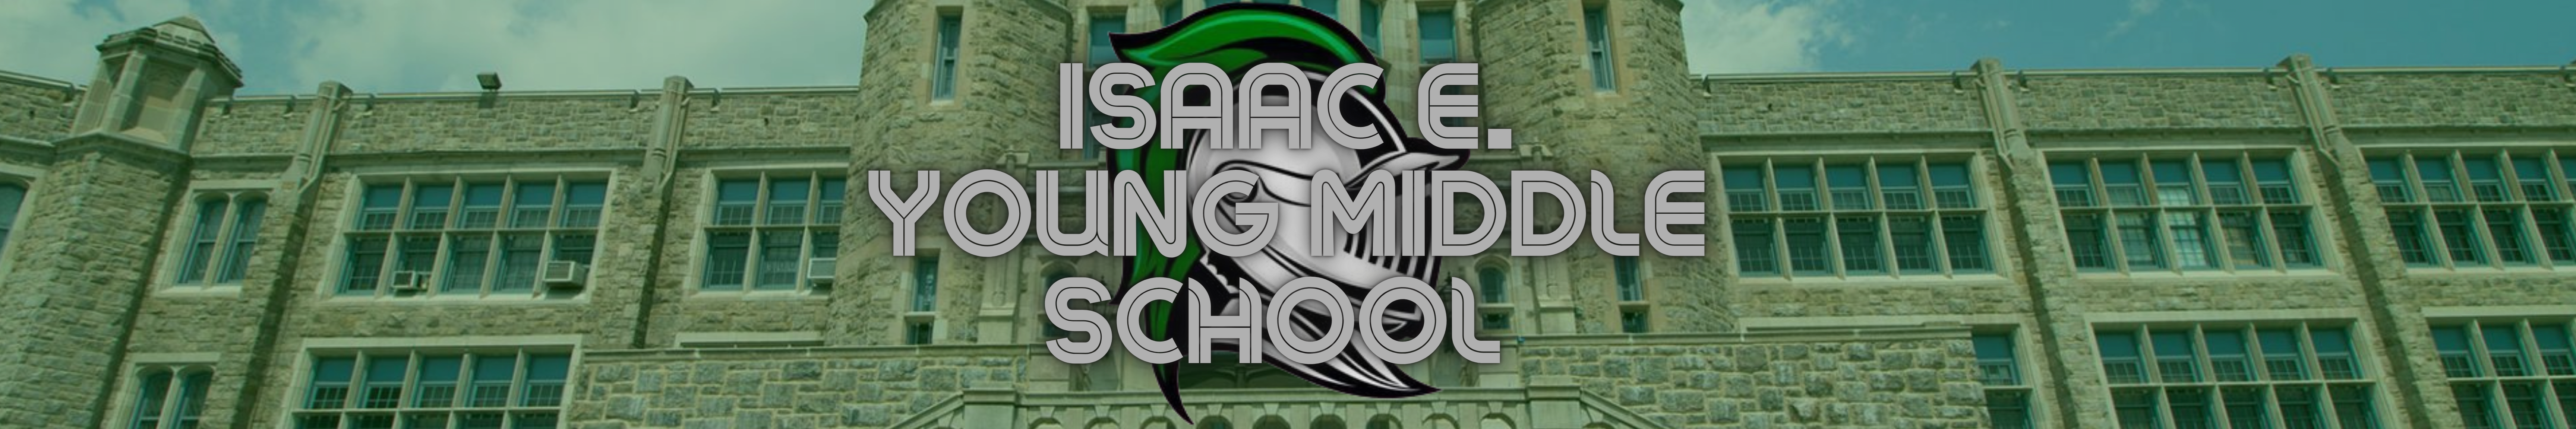 Isaac E. Young Middle School  banner